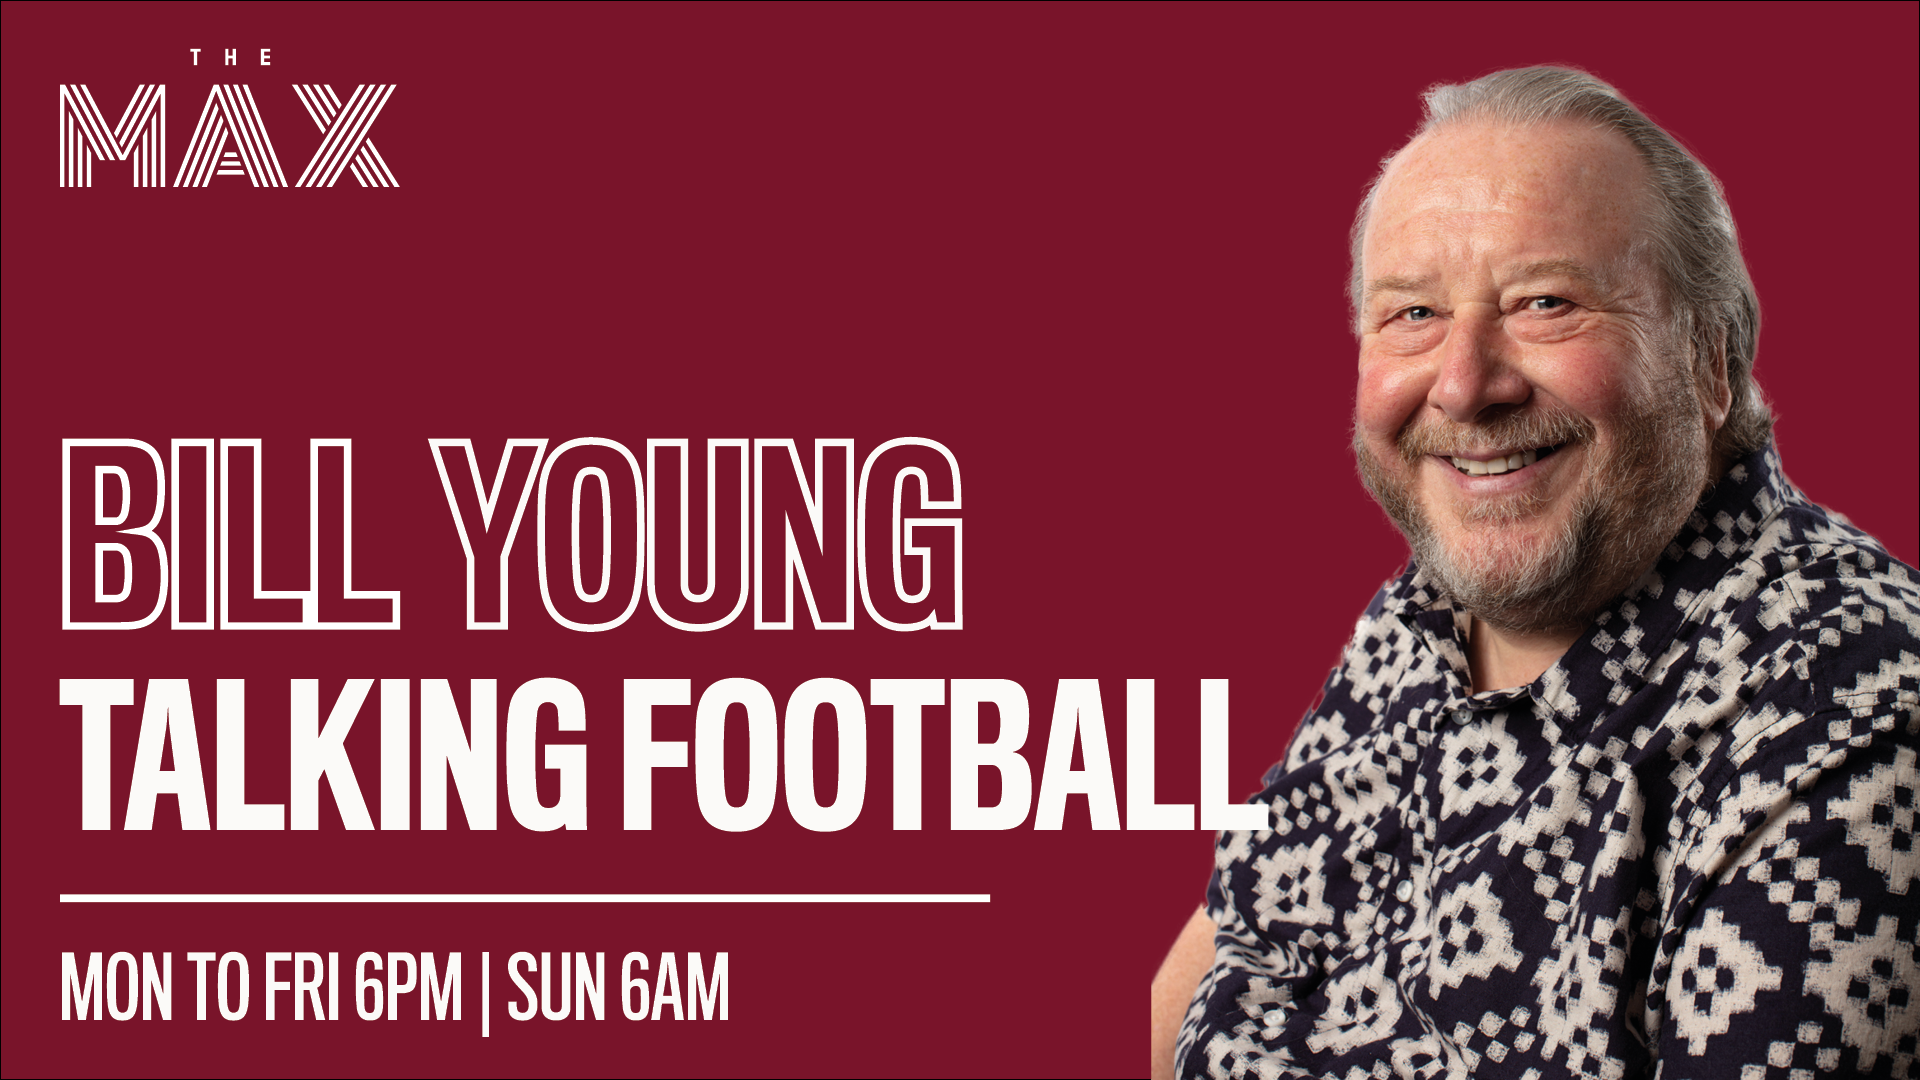 Talking Football with Bill Young - Thursday 18th March